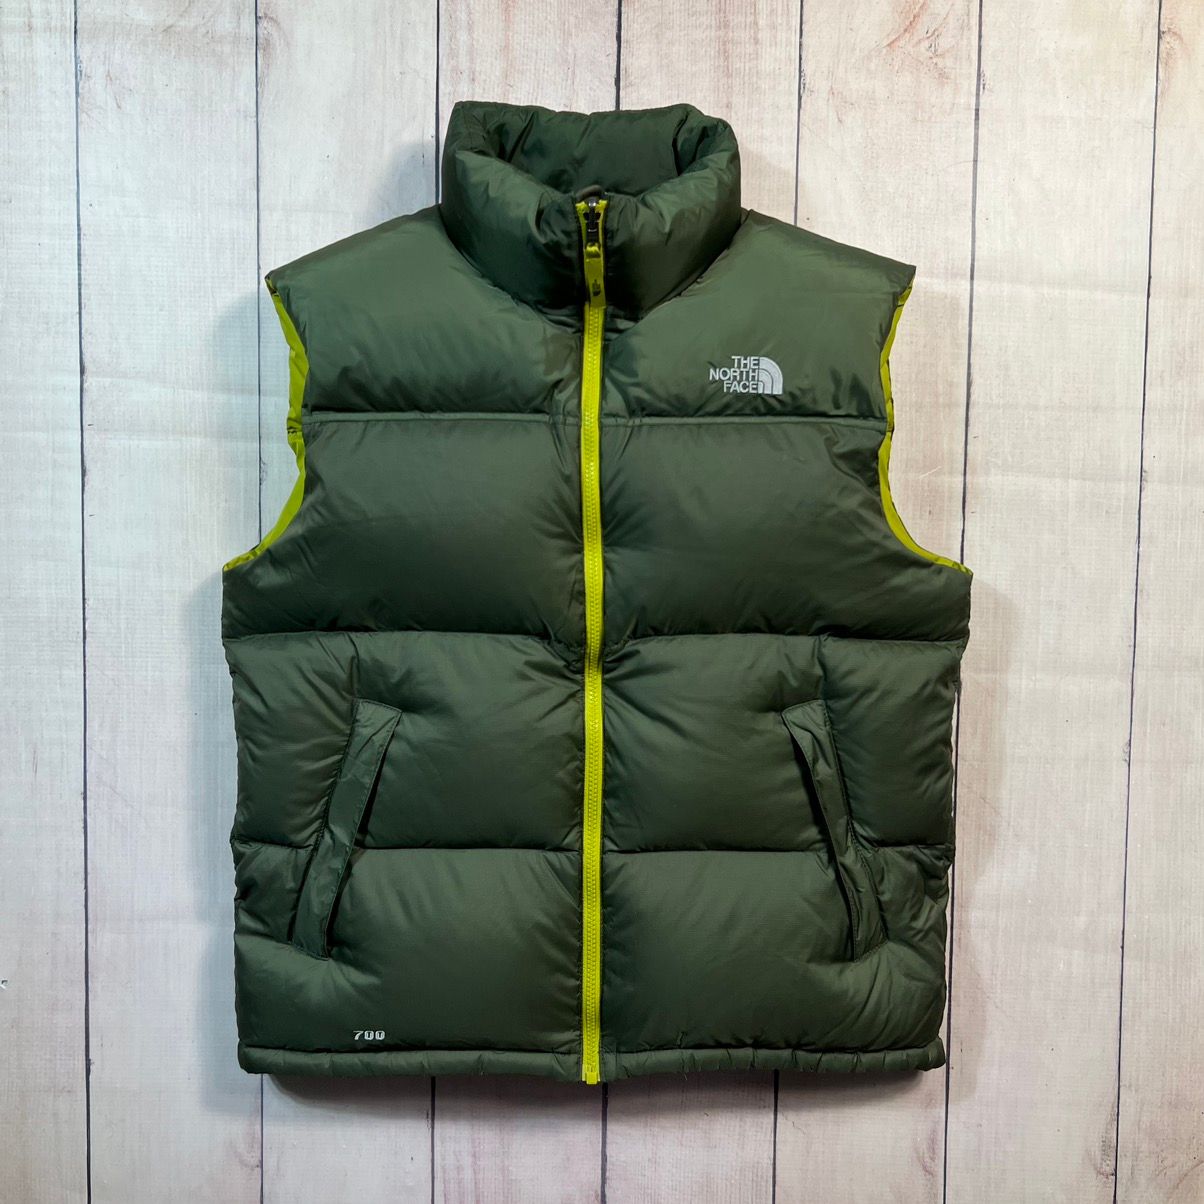 Pre-owned Outdoor Life X The North Face Puffer Vest Nuptse 700 Gilet Khaki Green